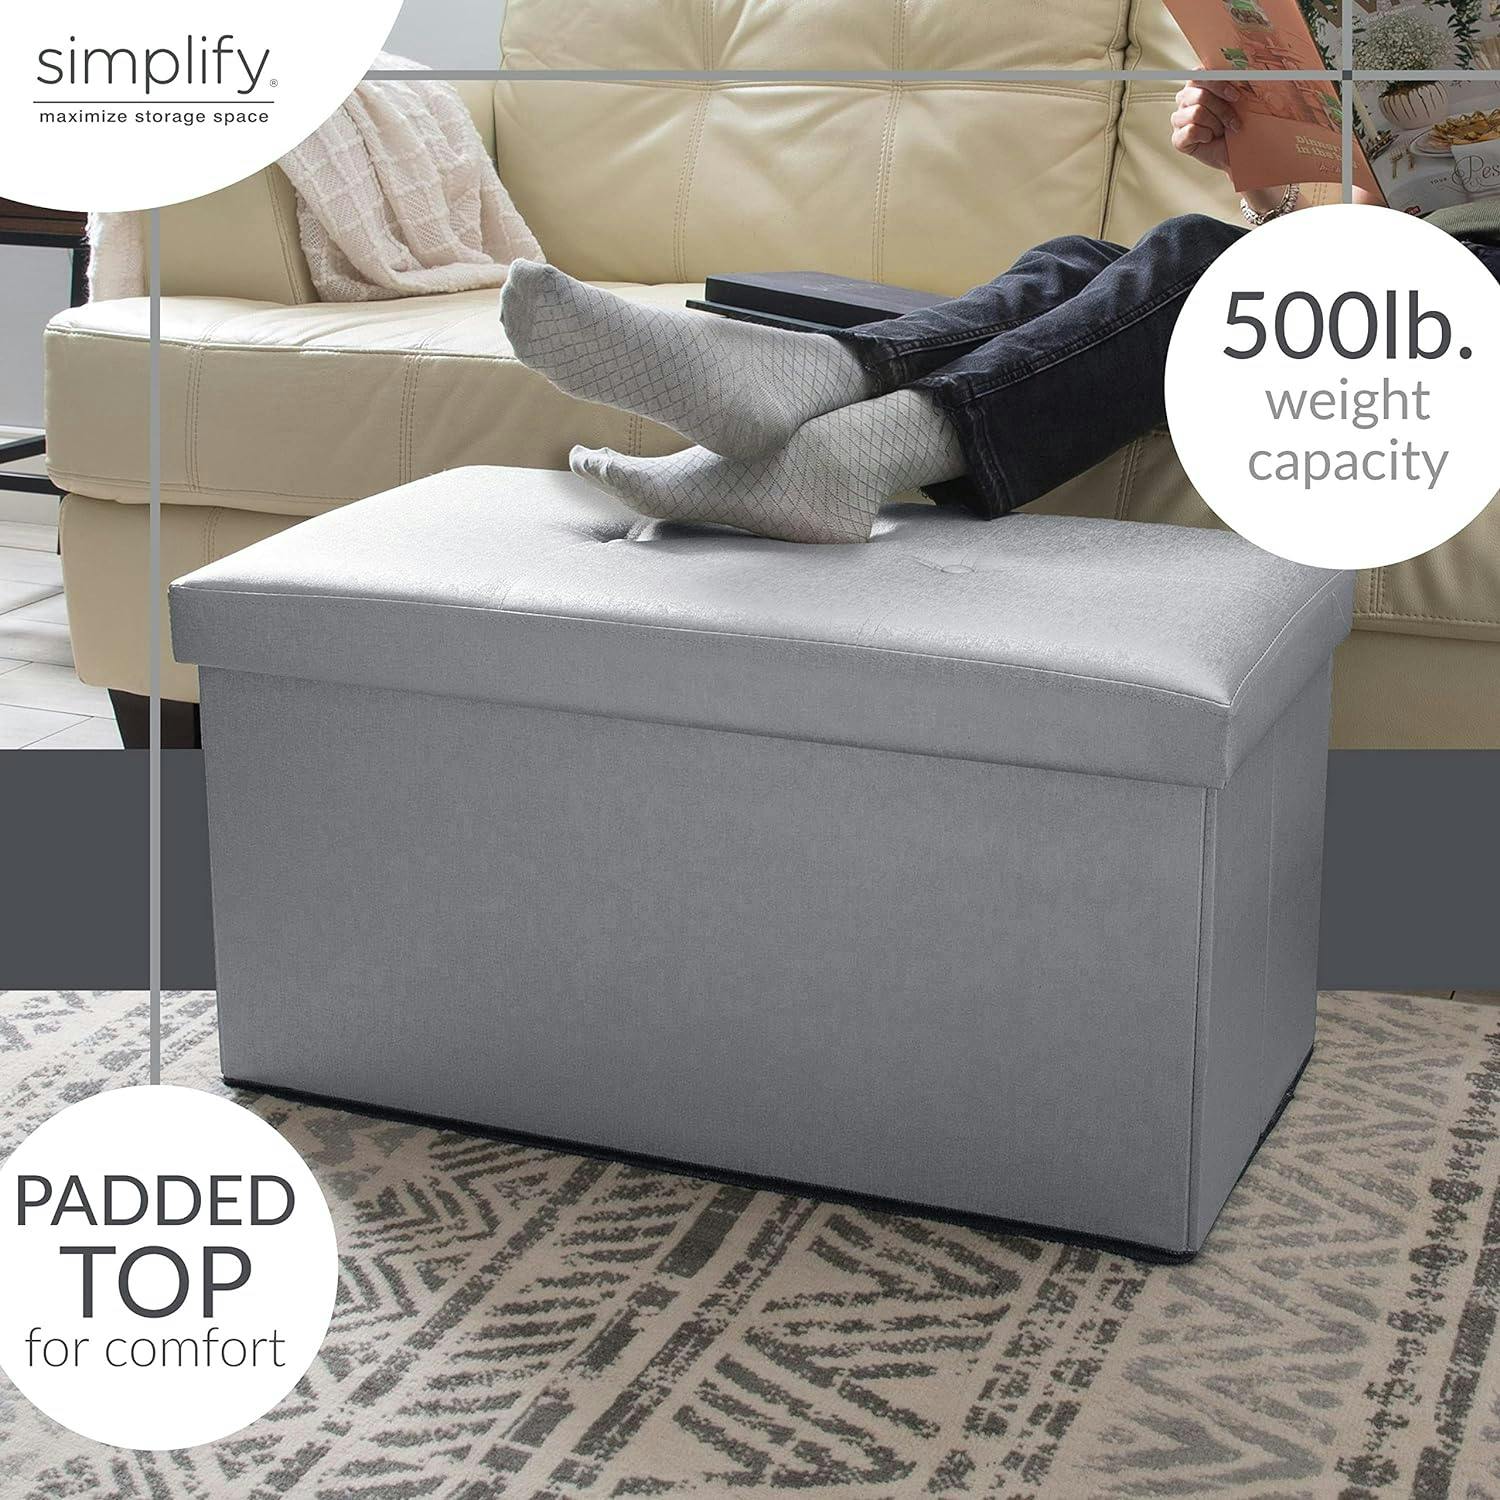 Classic Gray Faux Leather Folding Storage Ottoman Bench